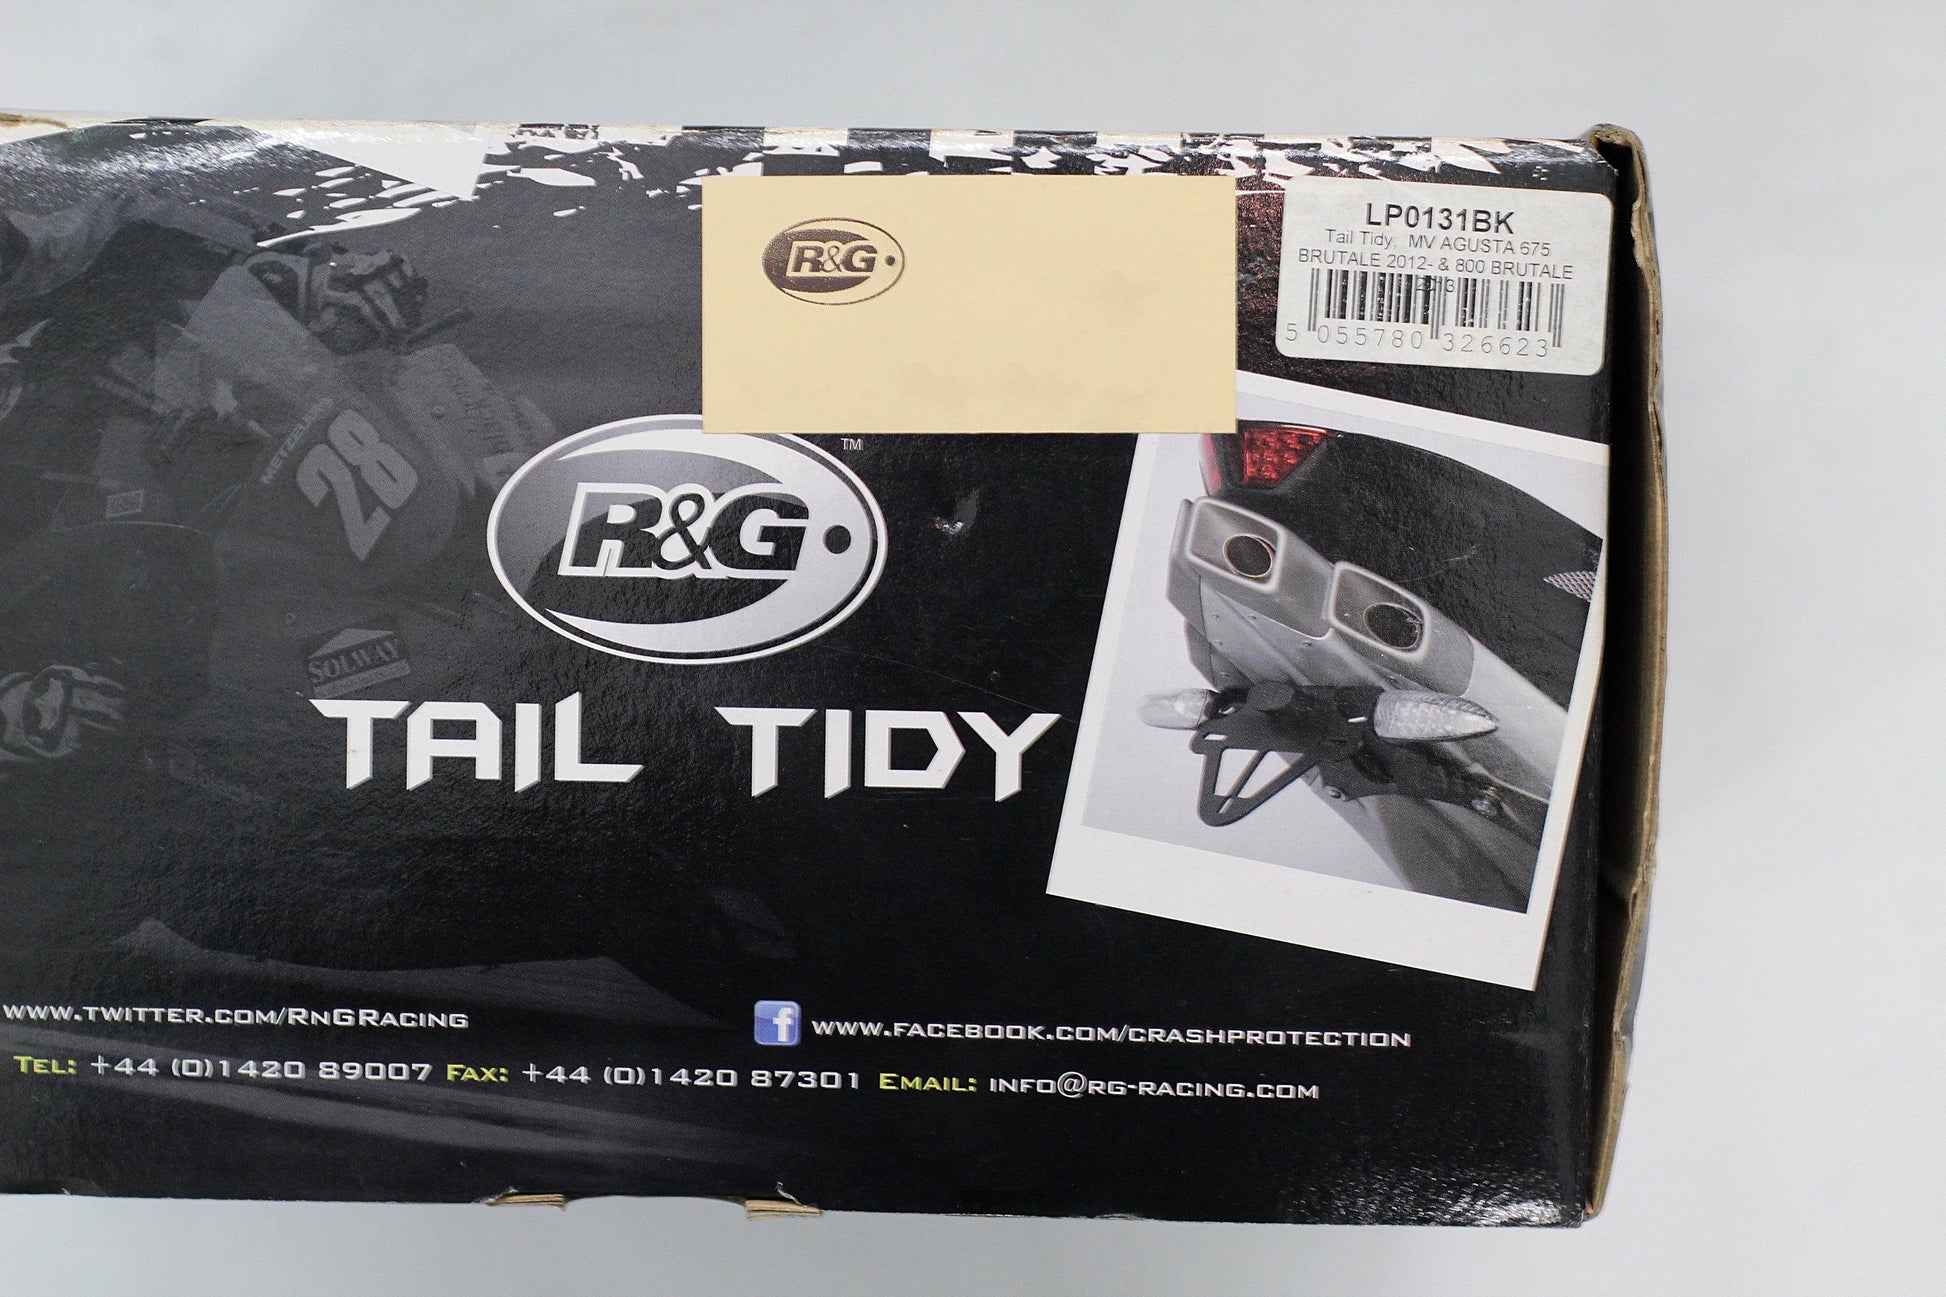 R&G Tail Tidy fits for MV Agusta Brutale 675 ('12-) and MV Brutale 800 ('12-'16) - Durian Bikers